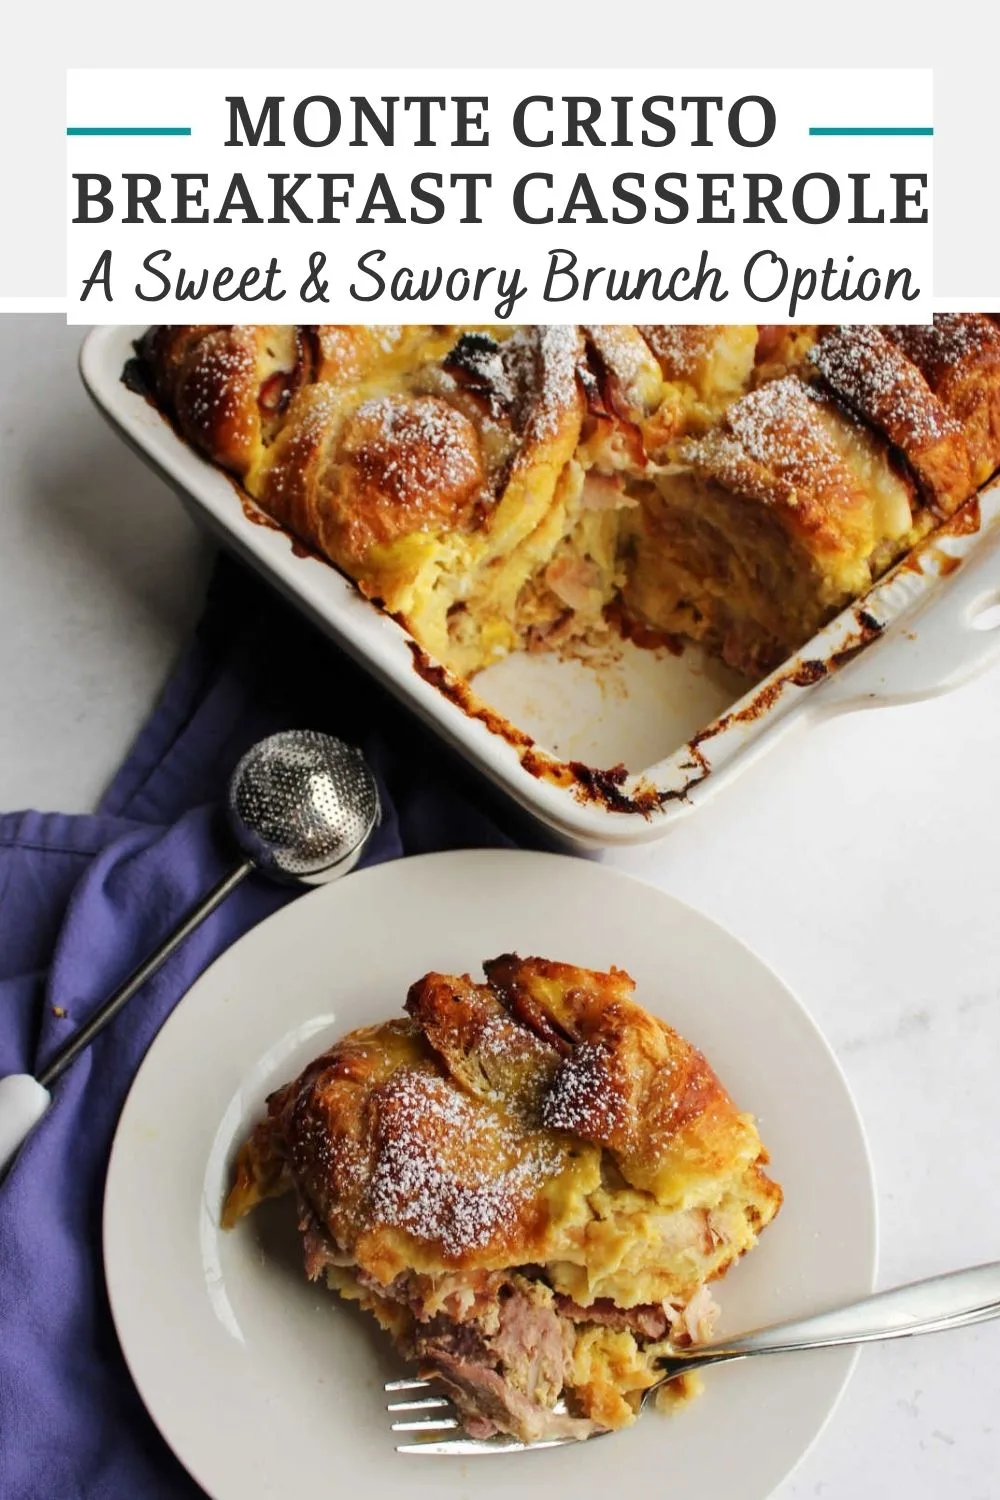 Turn the flavors of the classic sandwich into a great sweet and savory Monte Cristo breakfast casserole. This recipe has layers of ham, cheese, raspberry jam, eggs and more baked into a tasty brunch entrée.